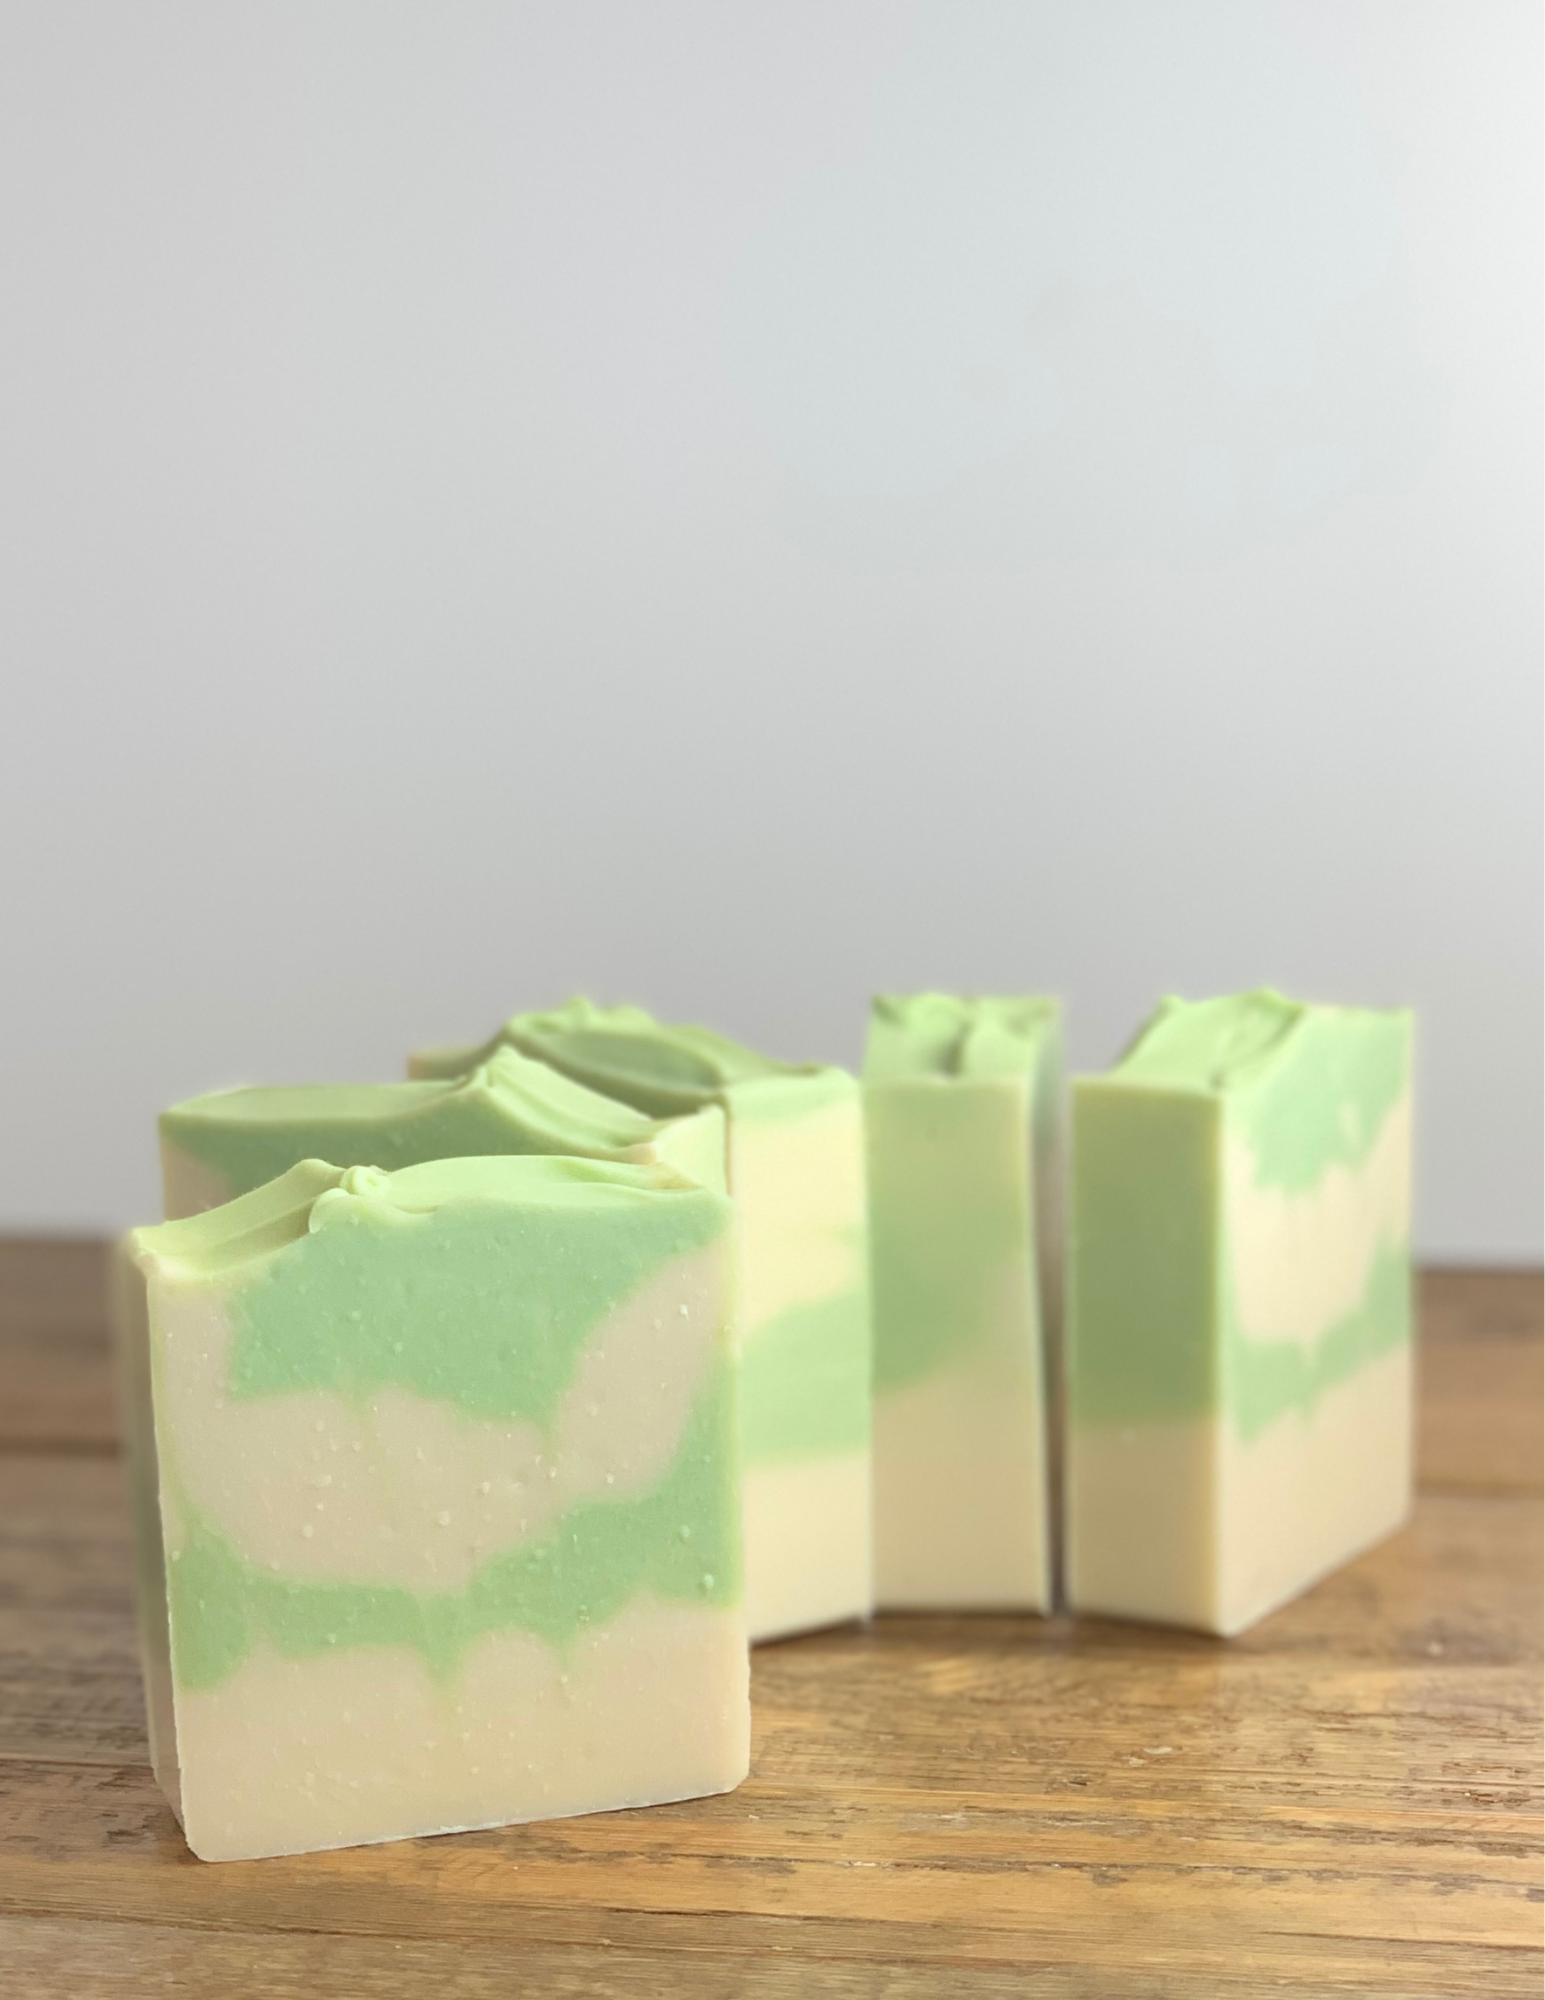 Bars of Eucalyptus Mint soap on a wooden tabletop with a white background. the soap is white with green swirls and green top. 